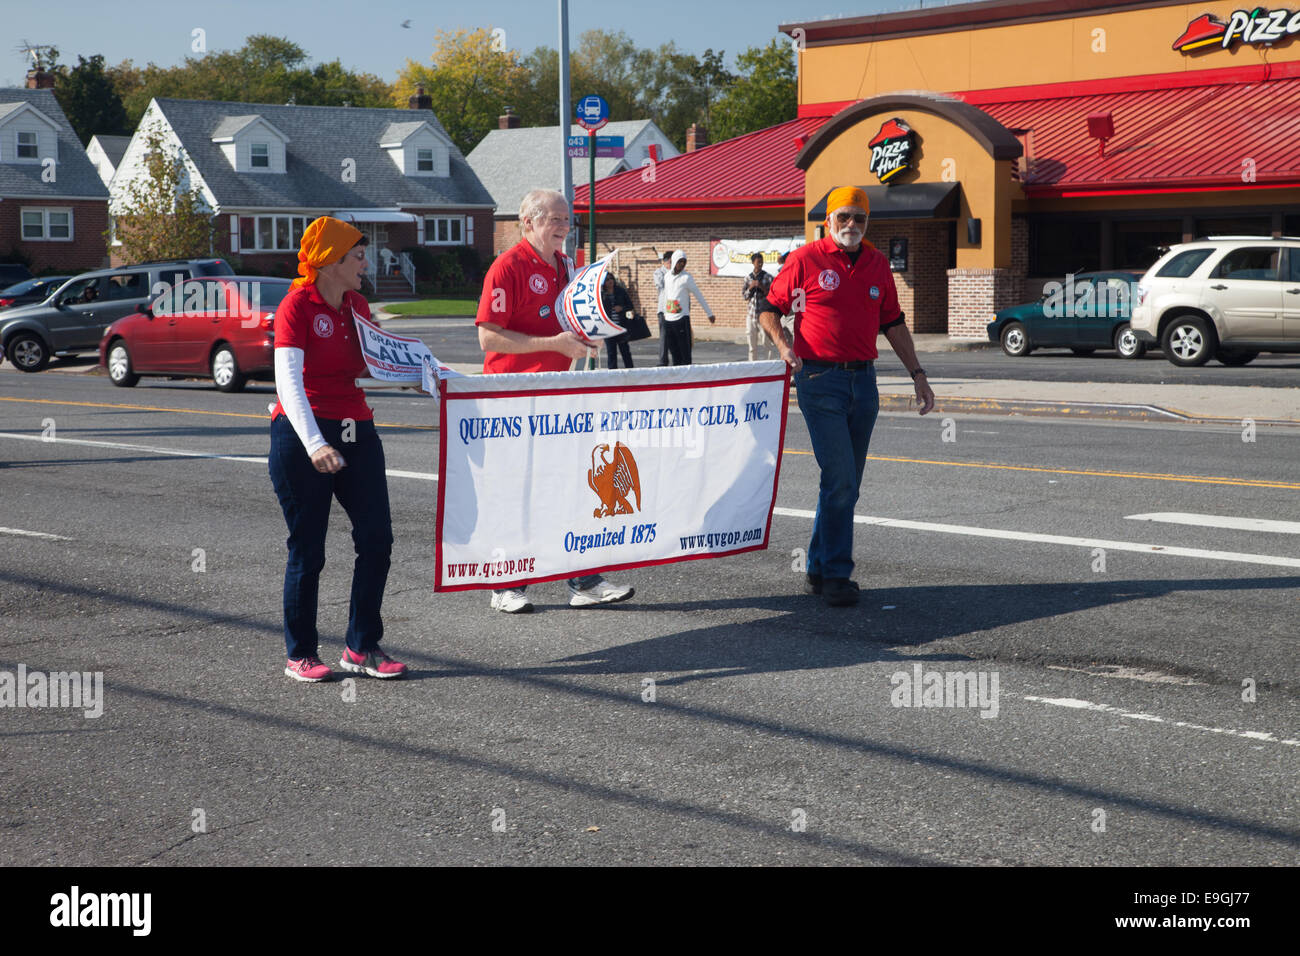 Floral Park, New York. 25th Oct, 2014. A parade in Floral Park, New York honoring the birthday of Guru Nanak Dev Ji, Master of the Sikh religion. Credit:  David Smith/Alamy Live News Stock Photo